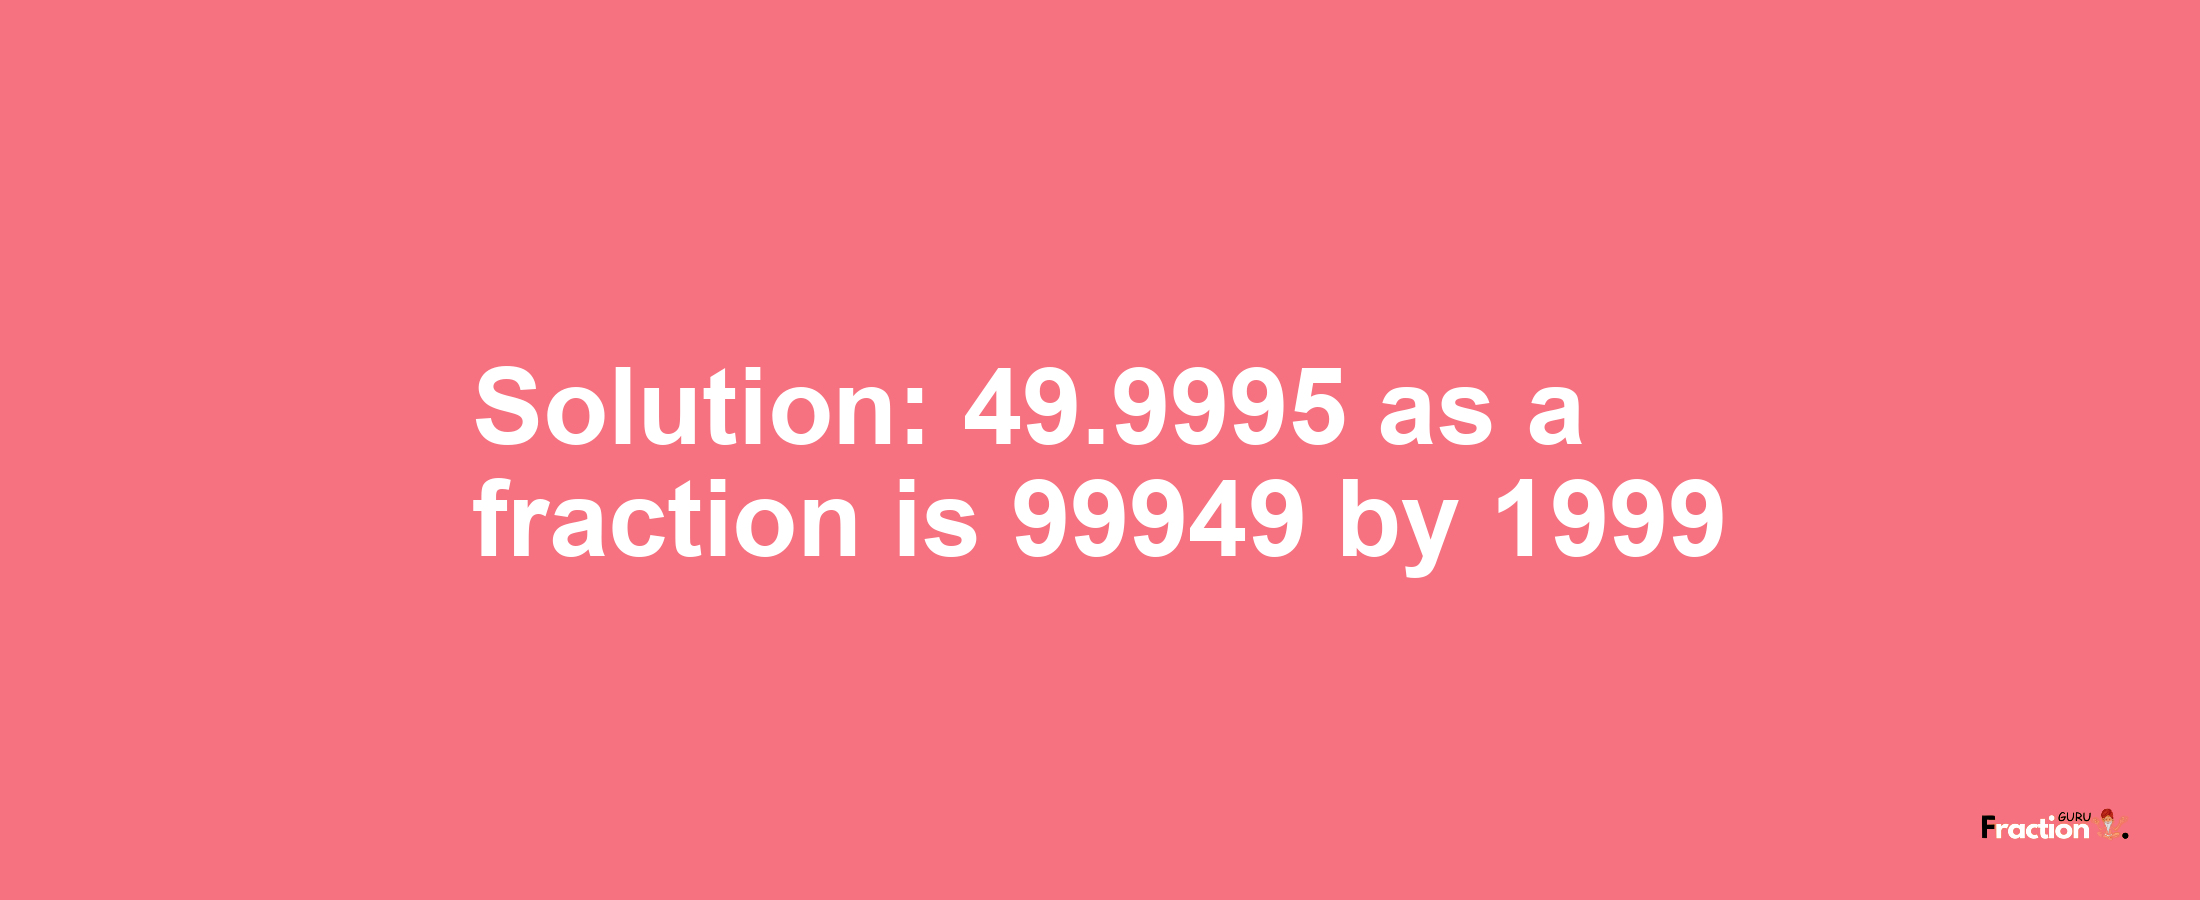 Solution:49.9995 as a fraction is 99949/1999